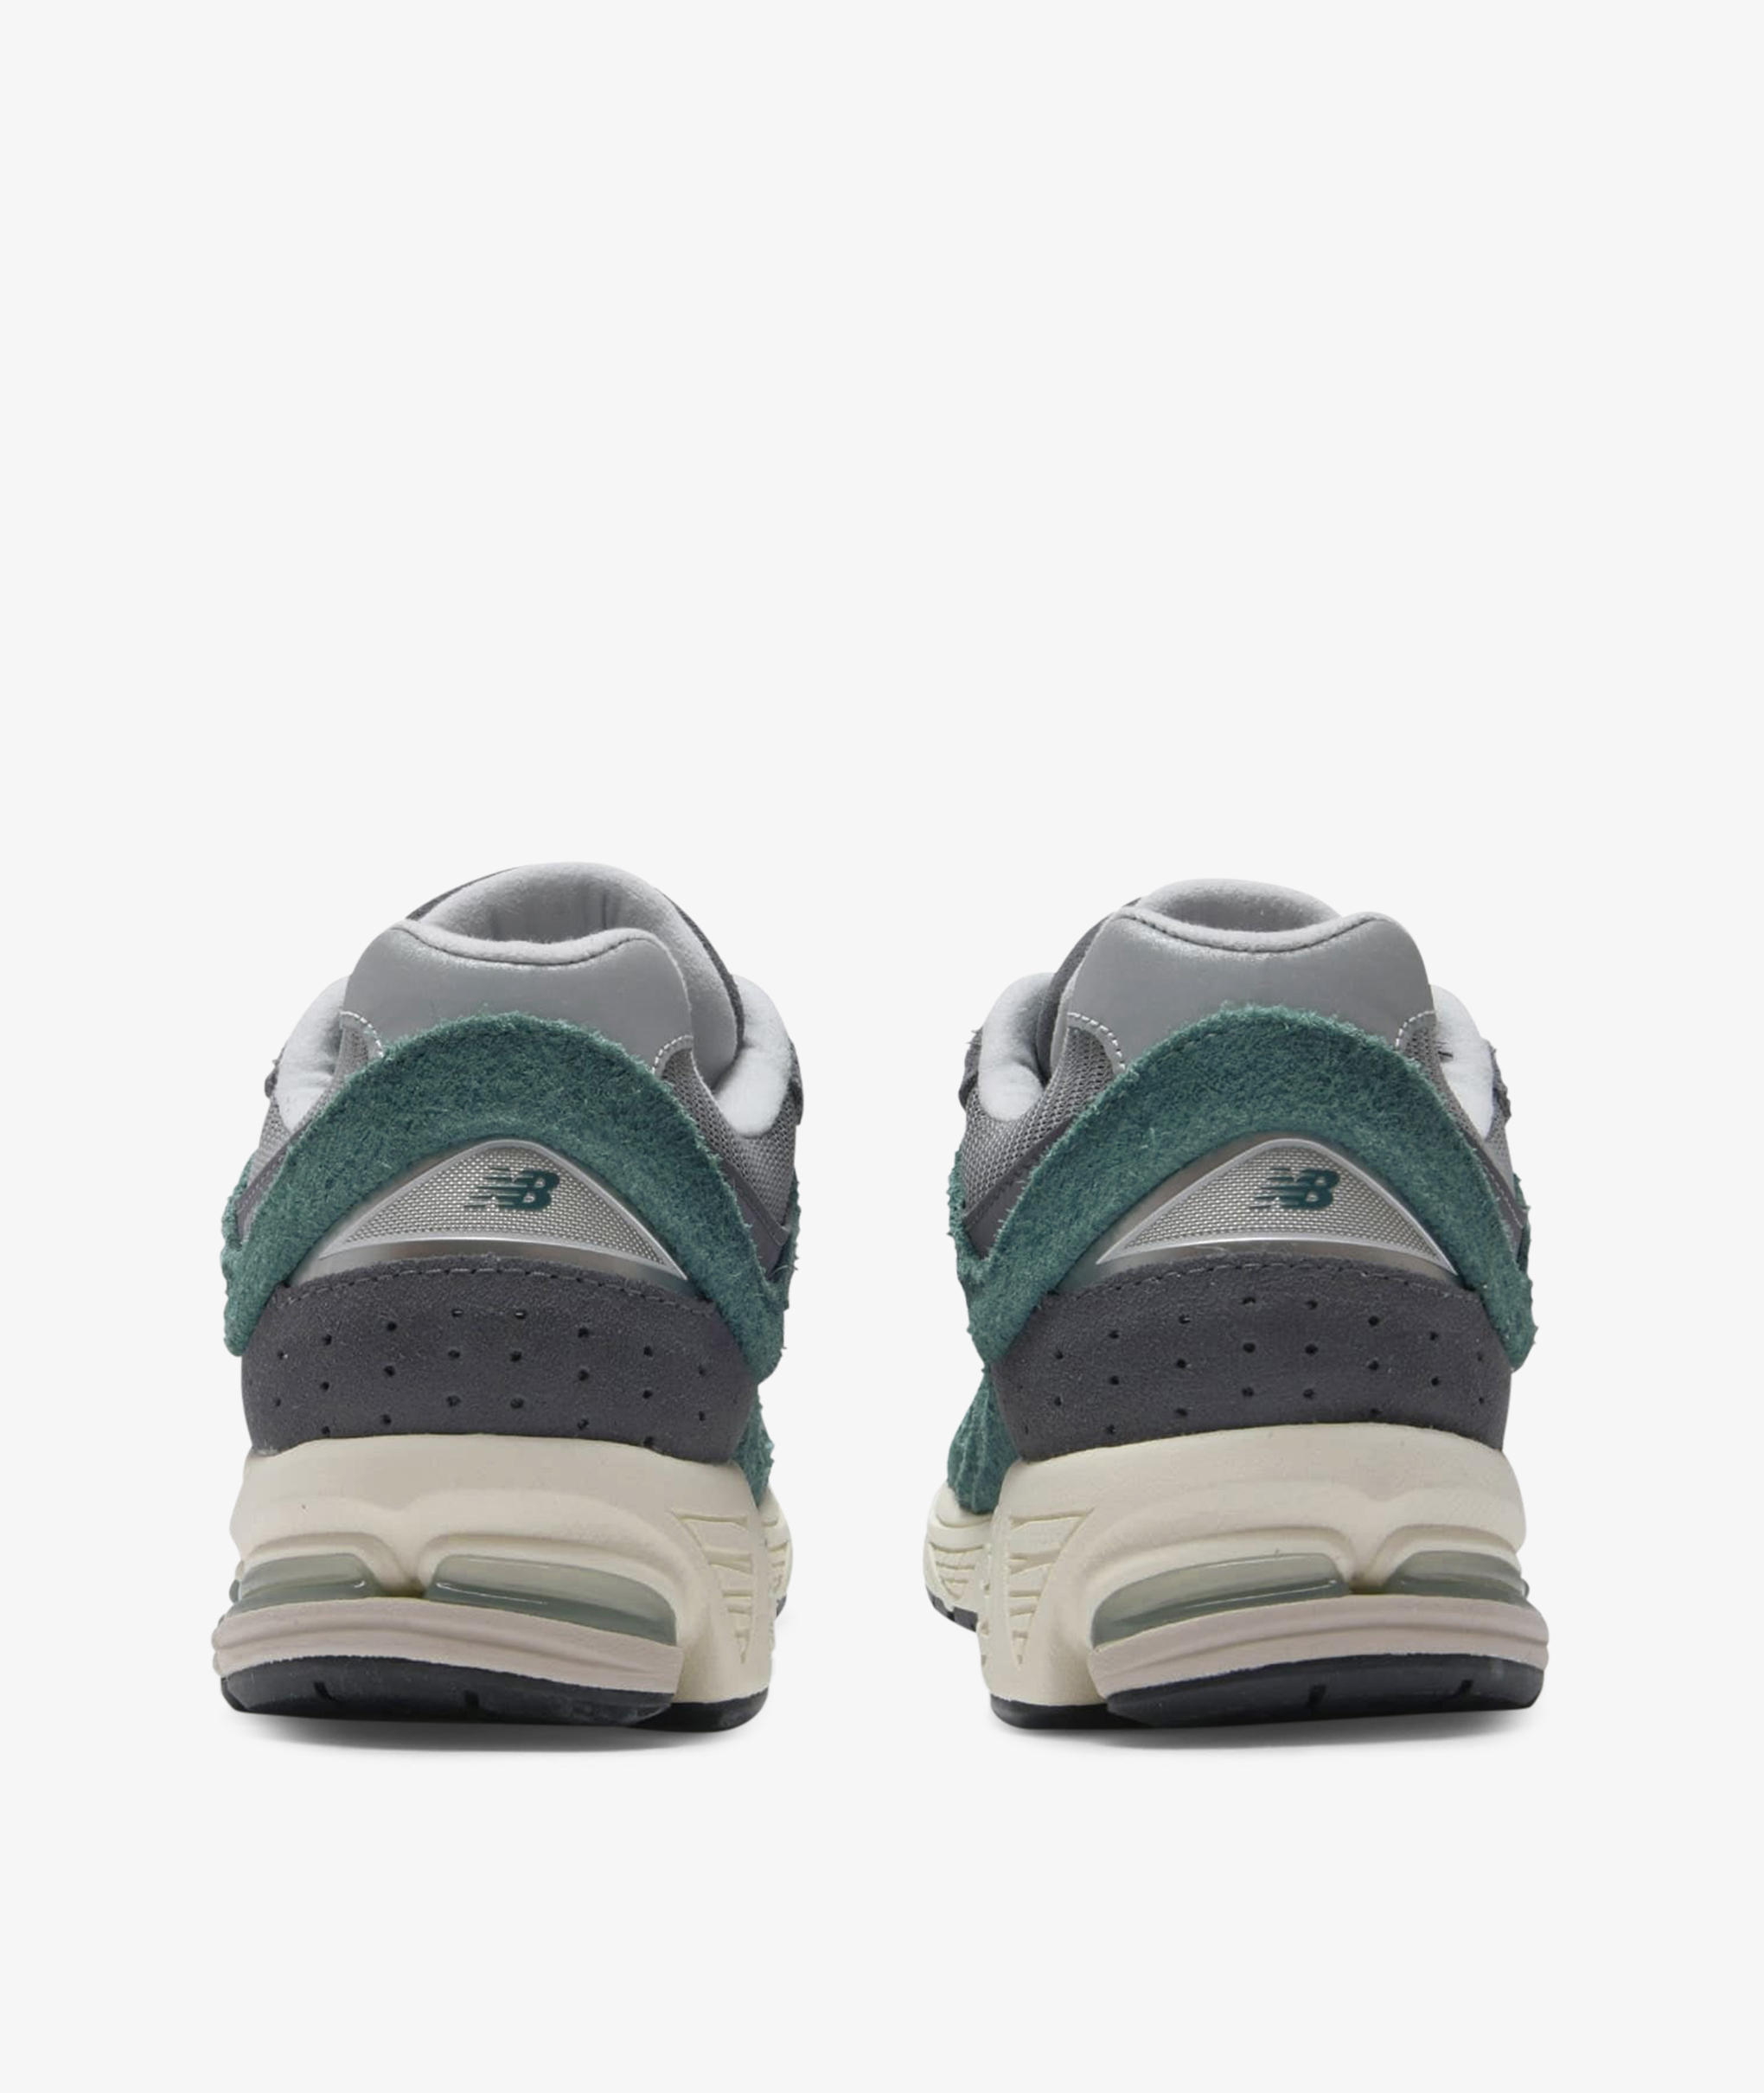 Norse Store | Shipping Worldwide - New Balance M2002REM - NEW SPRUCE/MAGNET